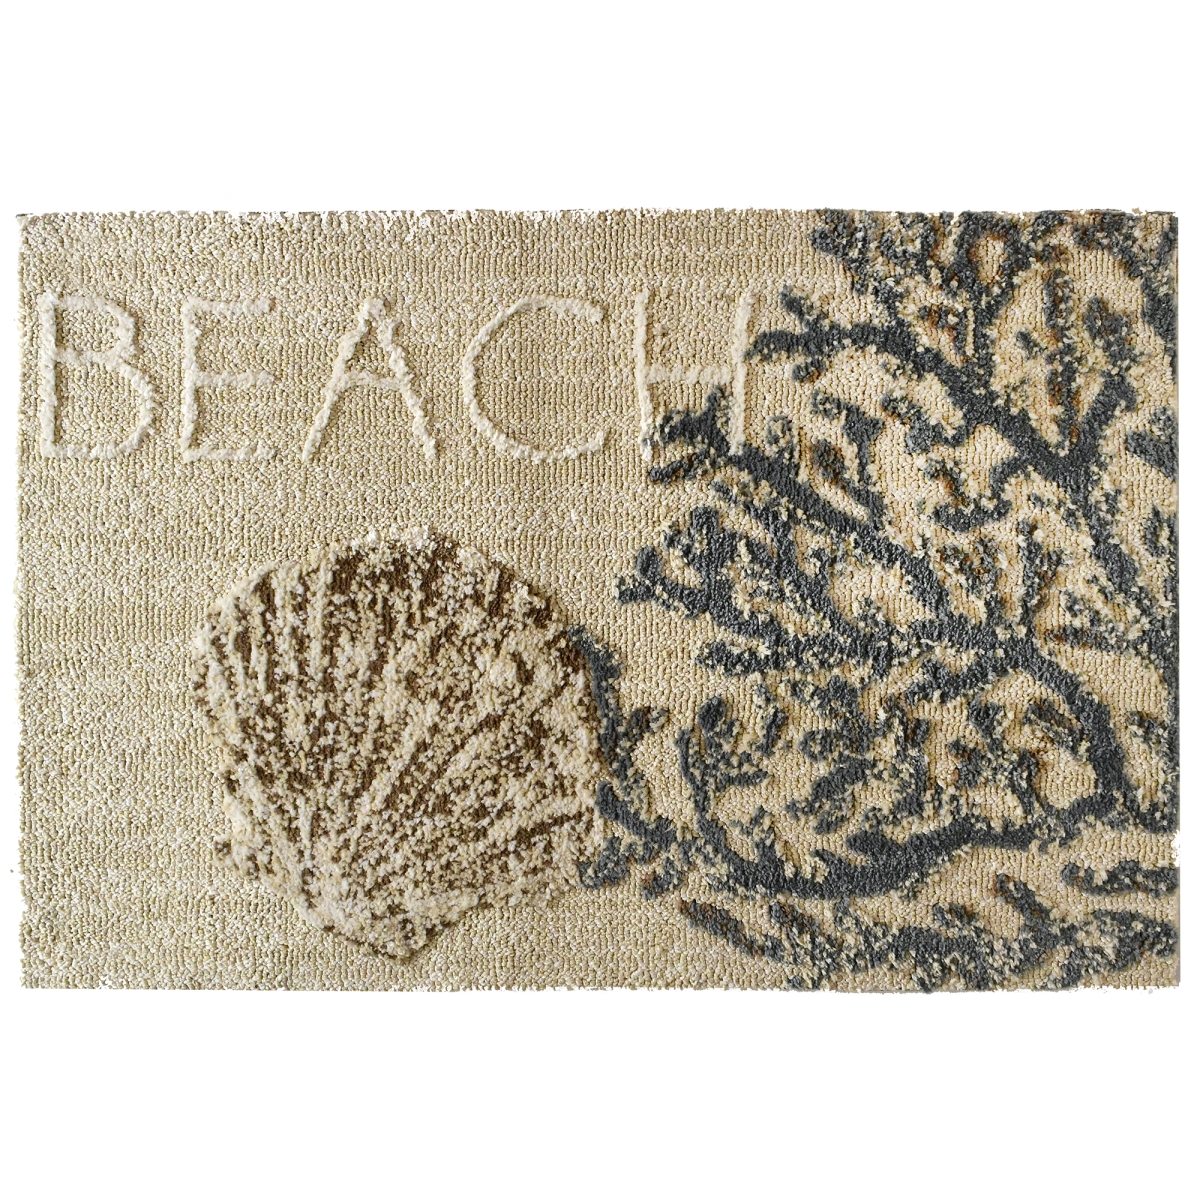 Mfa-jdr002 22 X 34 In. Beach Clam Shell Indoor Accent Rug